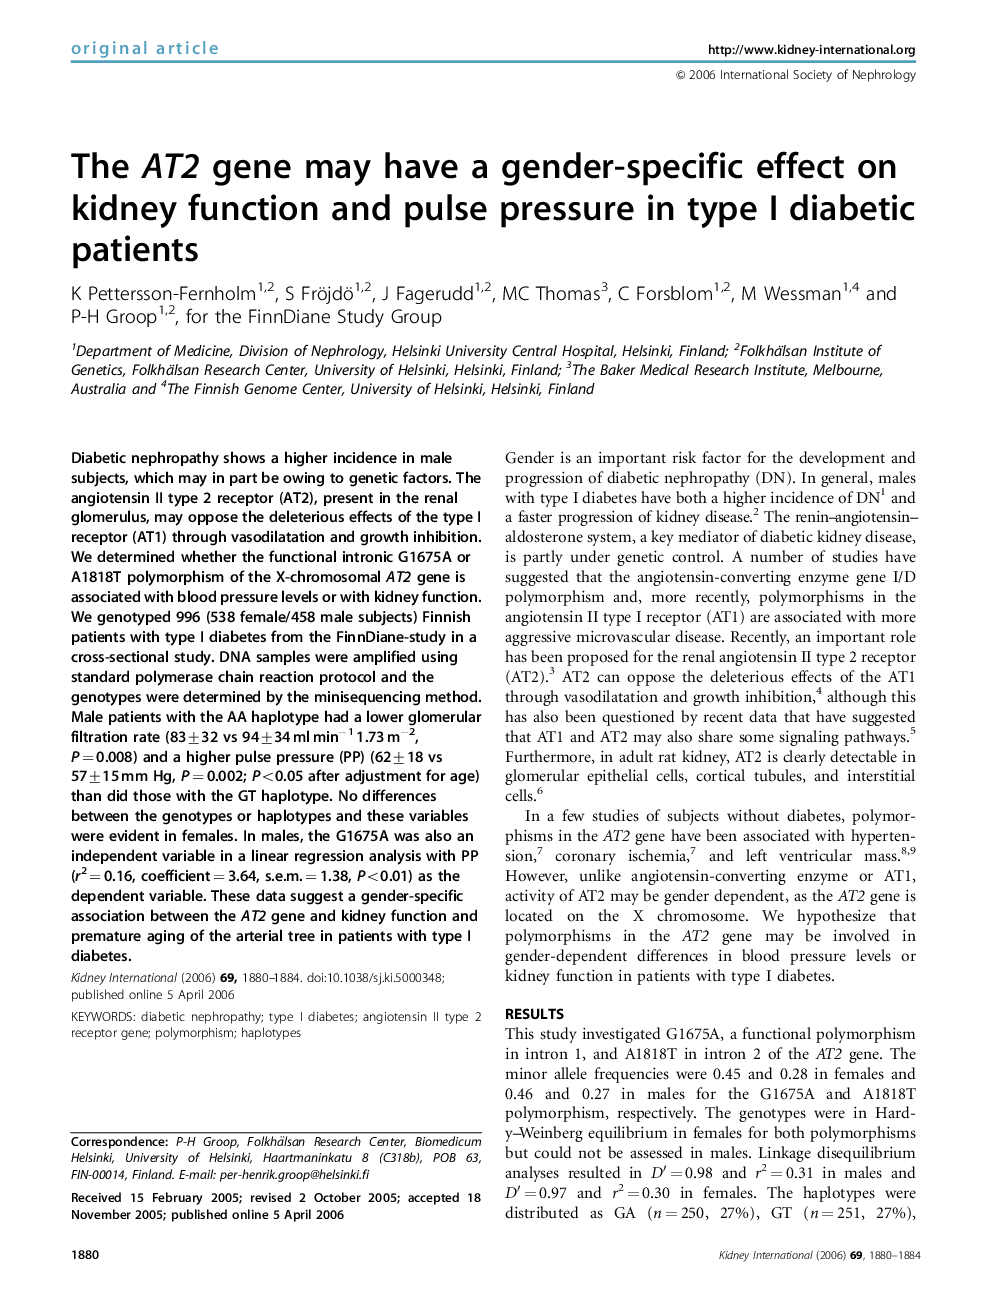 The AT2 gene may have a gender-specific effect on kidney function and pulse pressure in type I diabetic patients